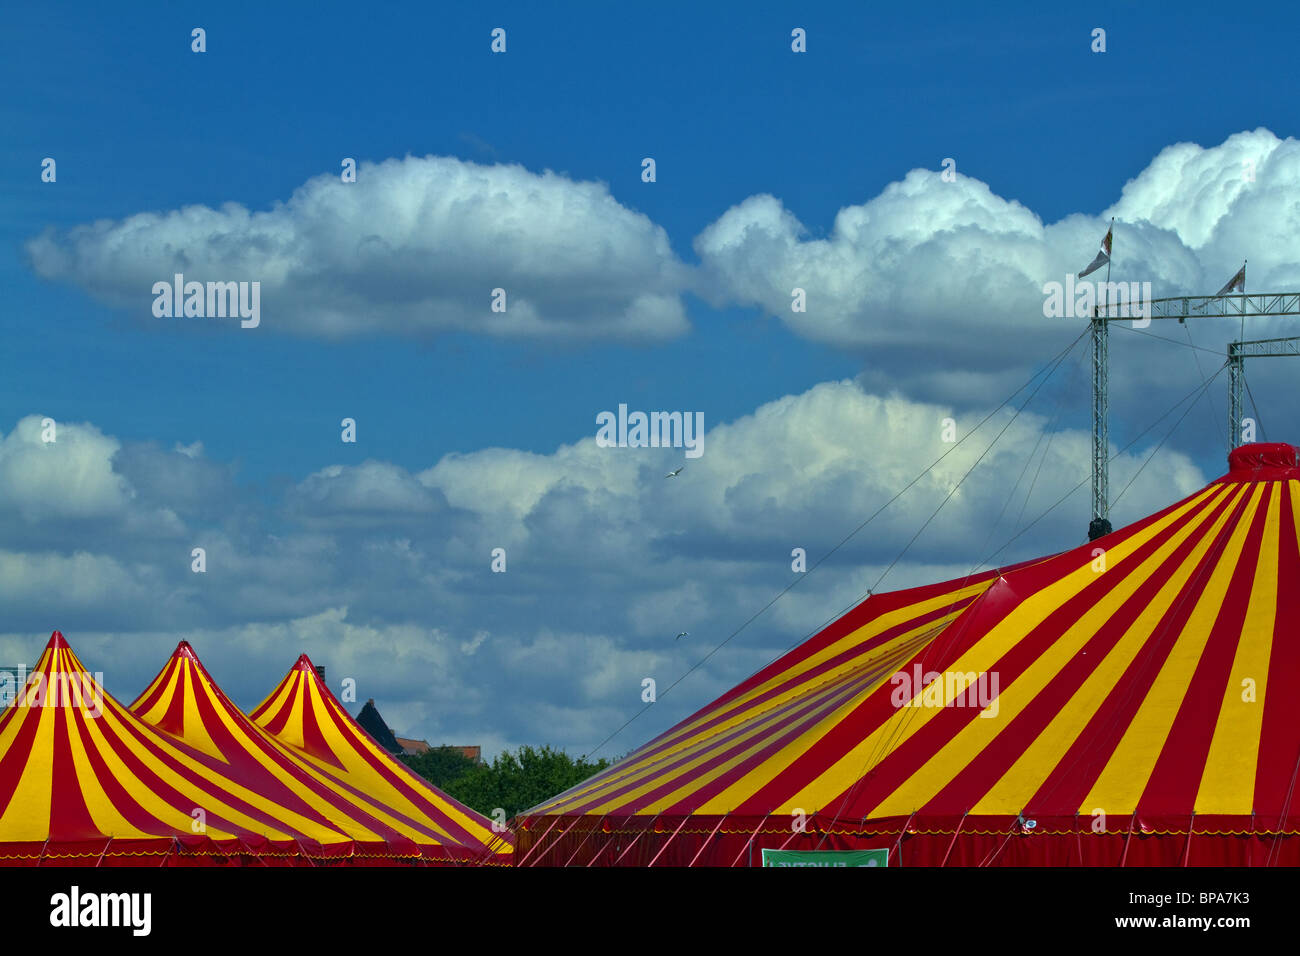 Striped circus tent against a blue sky with fluffy clouds. Horizontal Stock Photo